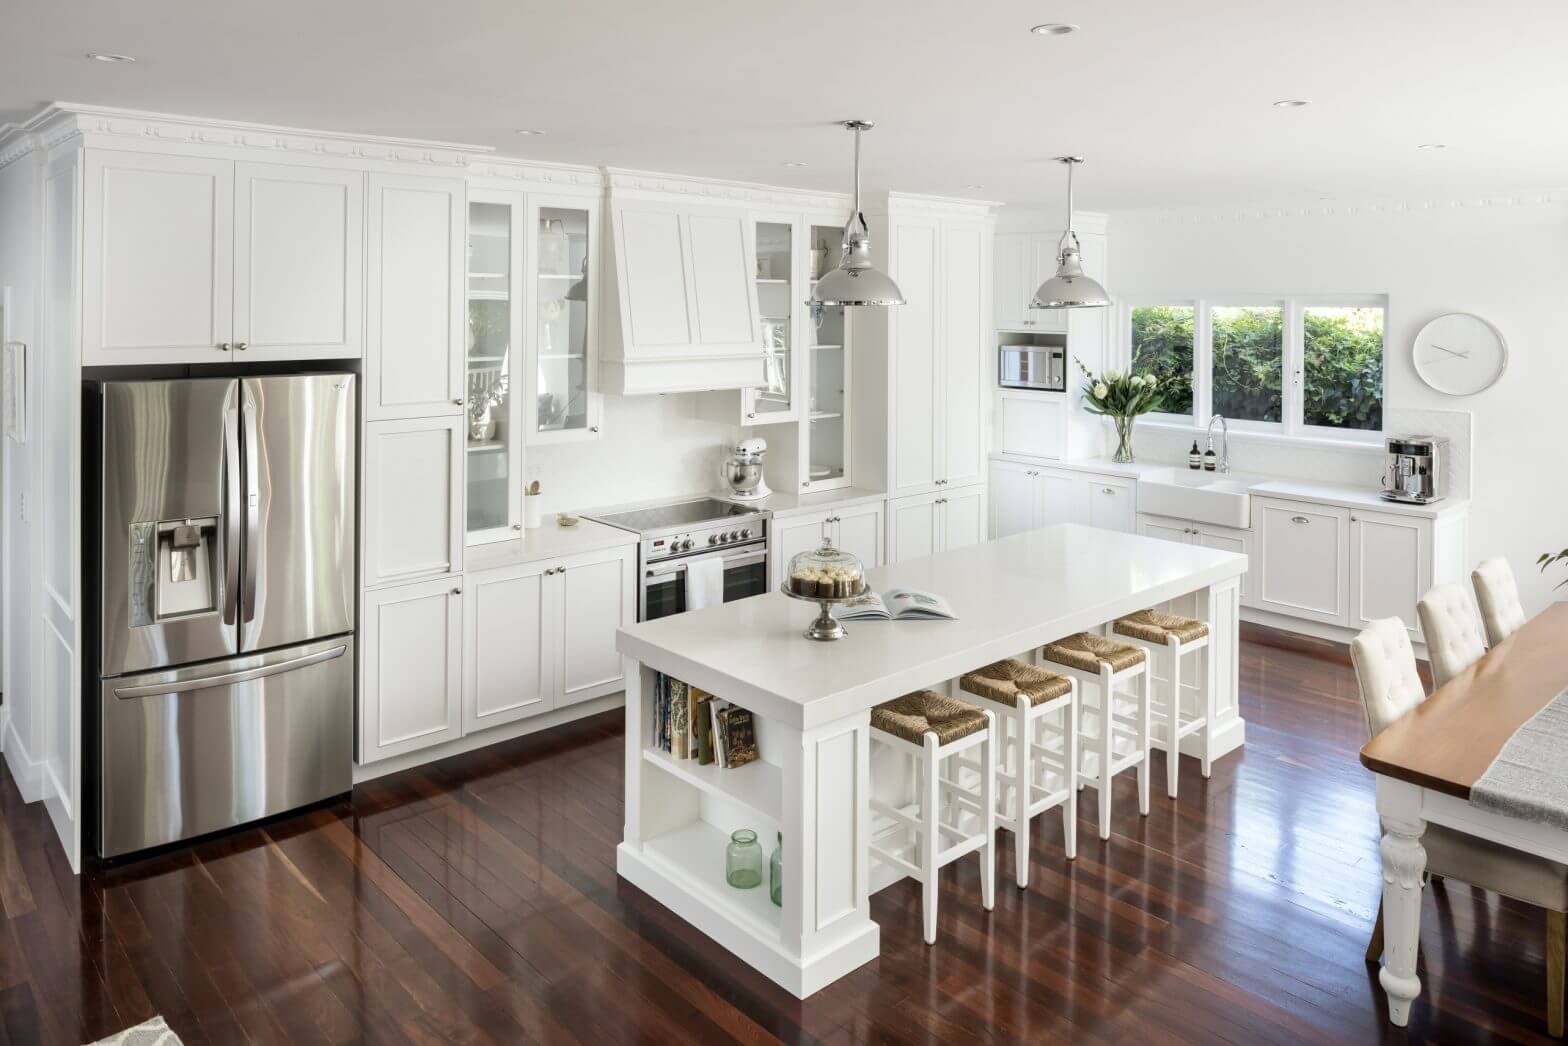 The Benefits of a Hampton Style Kitchen